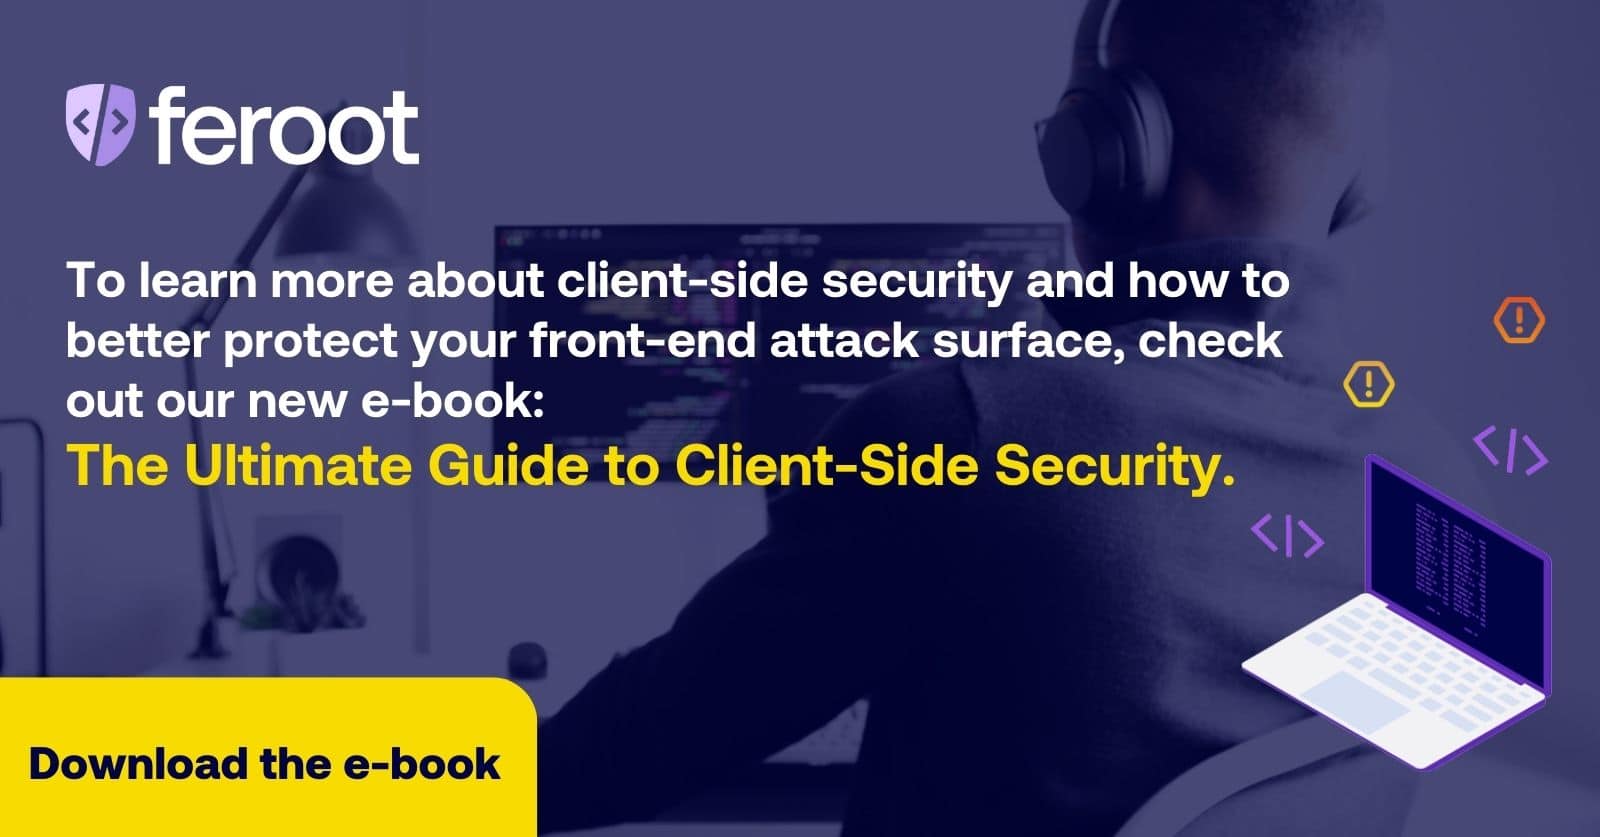 To learn more about client-side security and how to better protect your front-end attack surface, check out our new e-book: The Ultimate Guide to Client-Side Security.